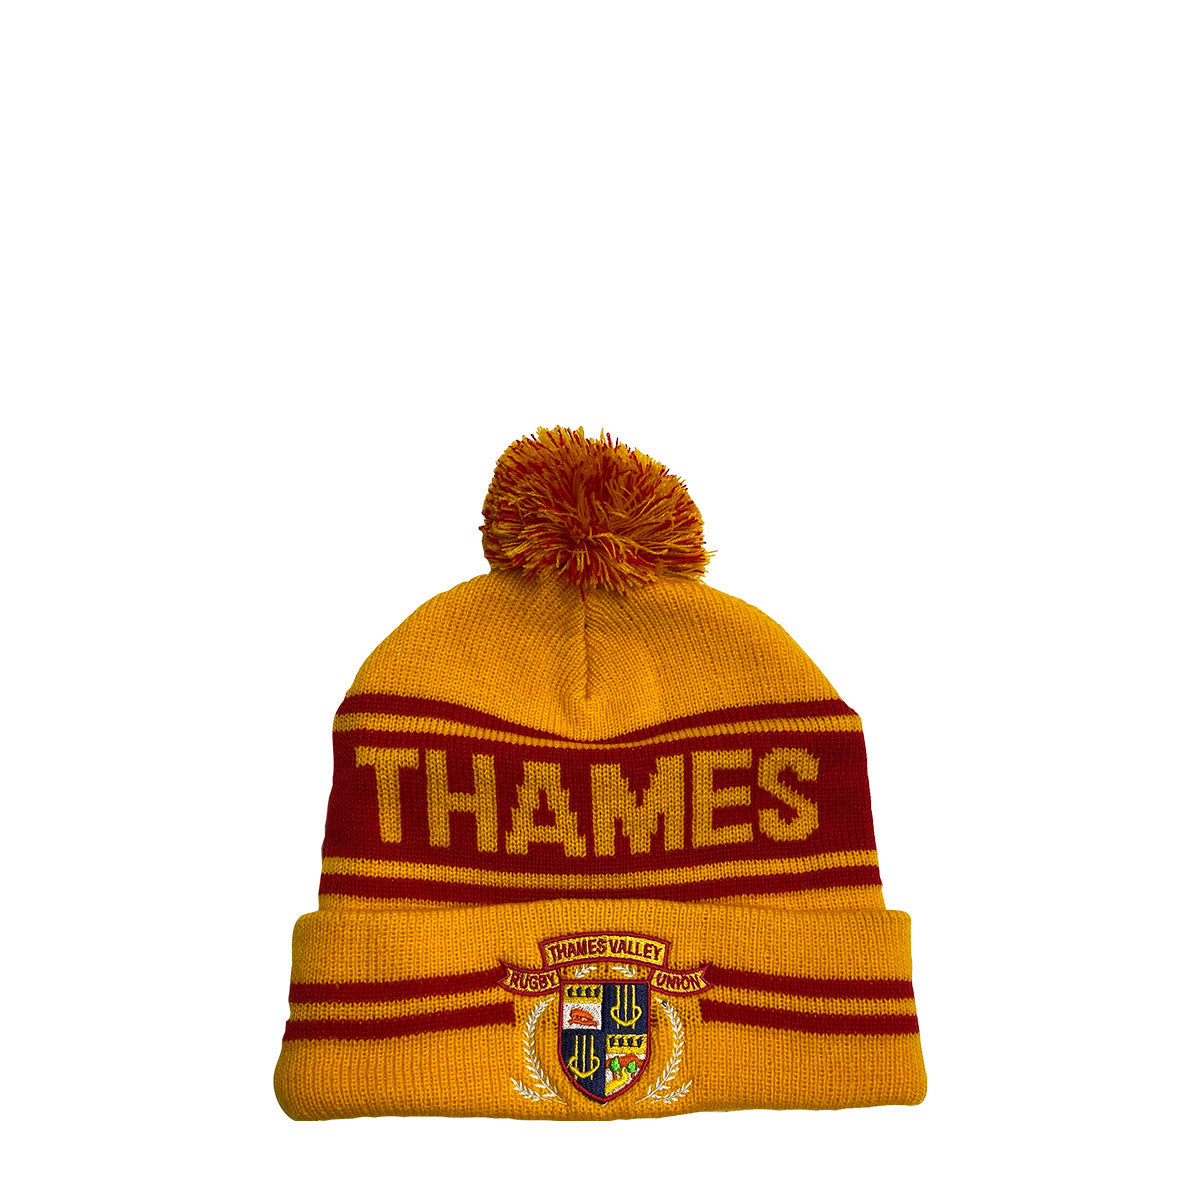 Thames Valley Swampfoxes Beanie